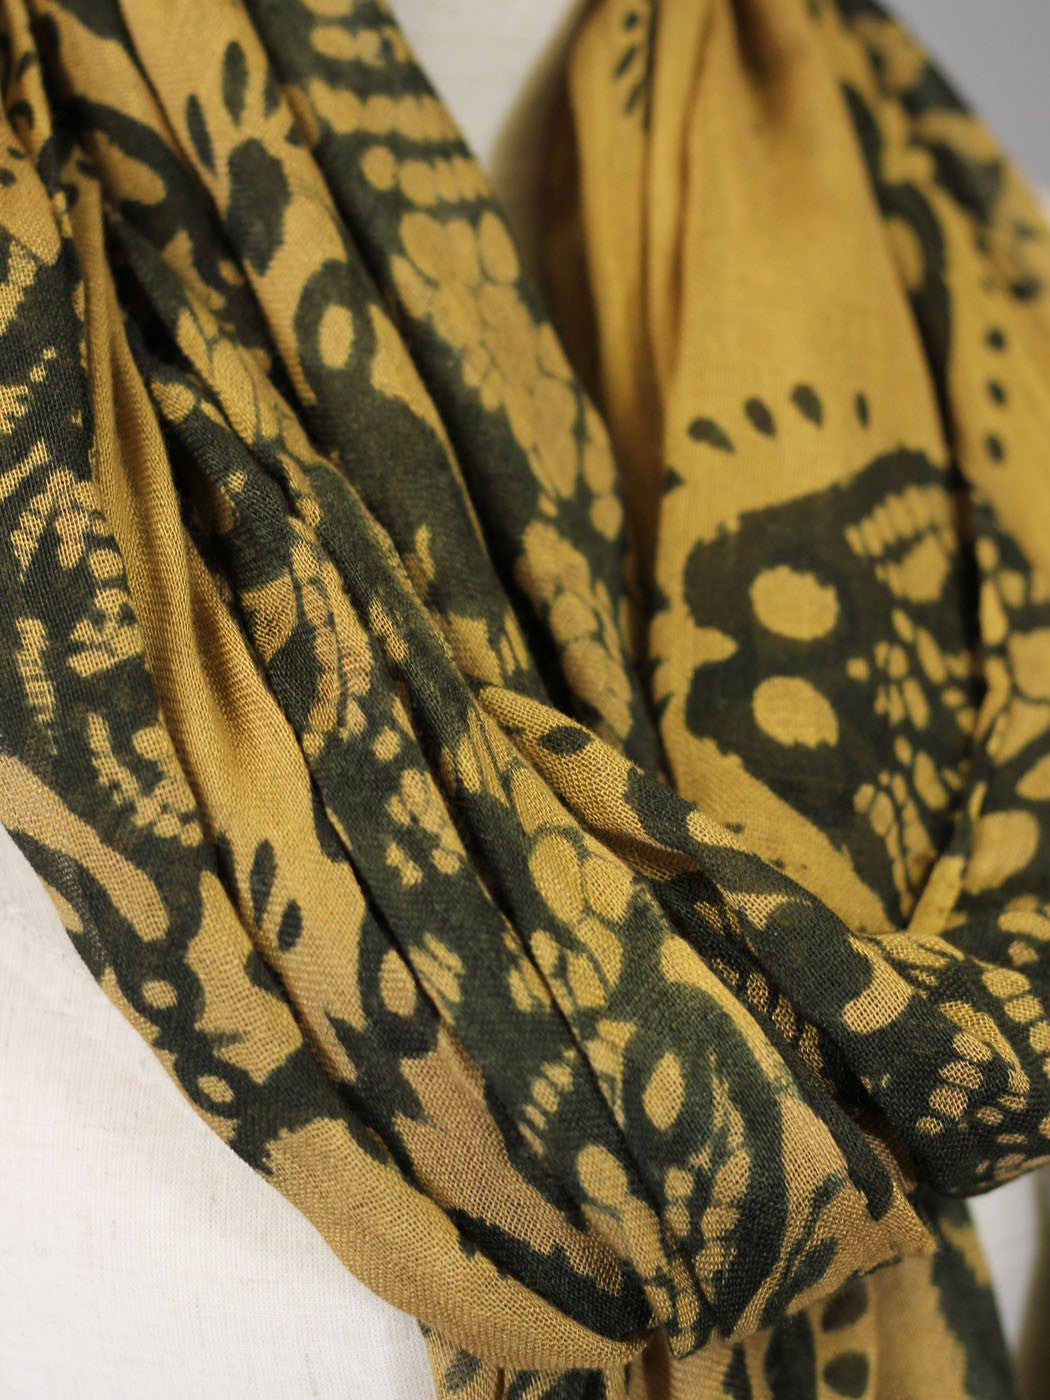 Gentle Fawn Arista Brown Butterscotch Print Twisted Fringed Fashion Scarf - ALILANG.COM